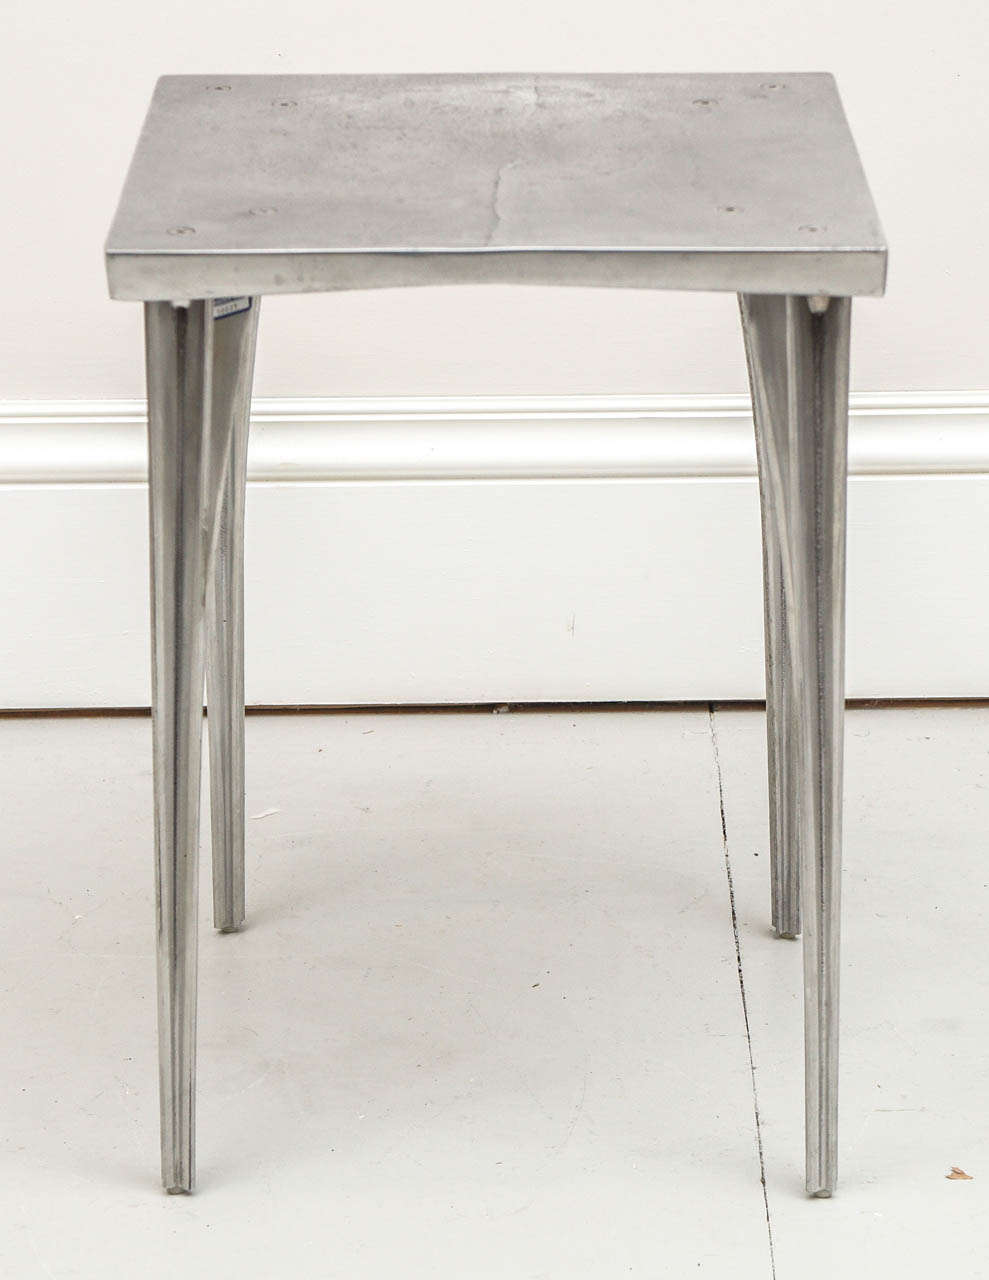 Handsome side or occasional table designed by Robert Josten. The table is sand cast aluminum and polished aluminum.